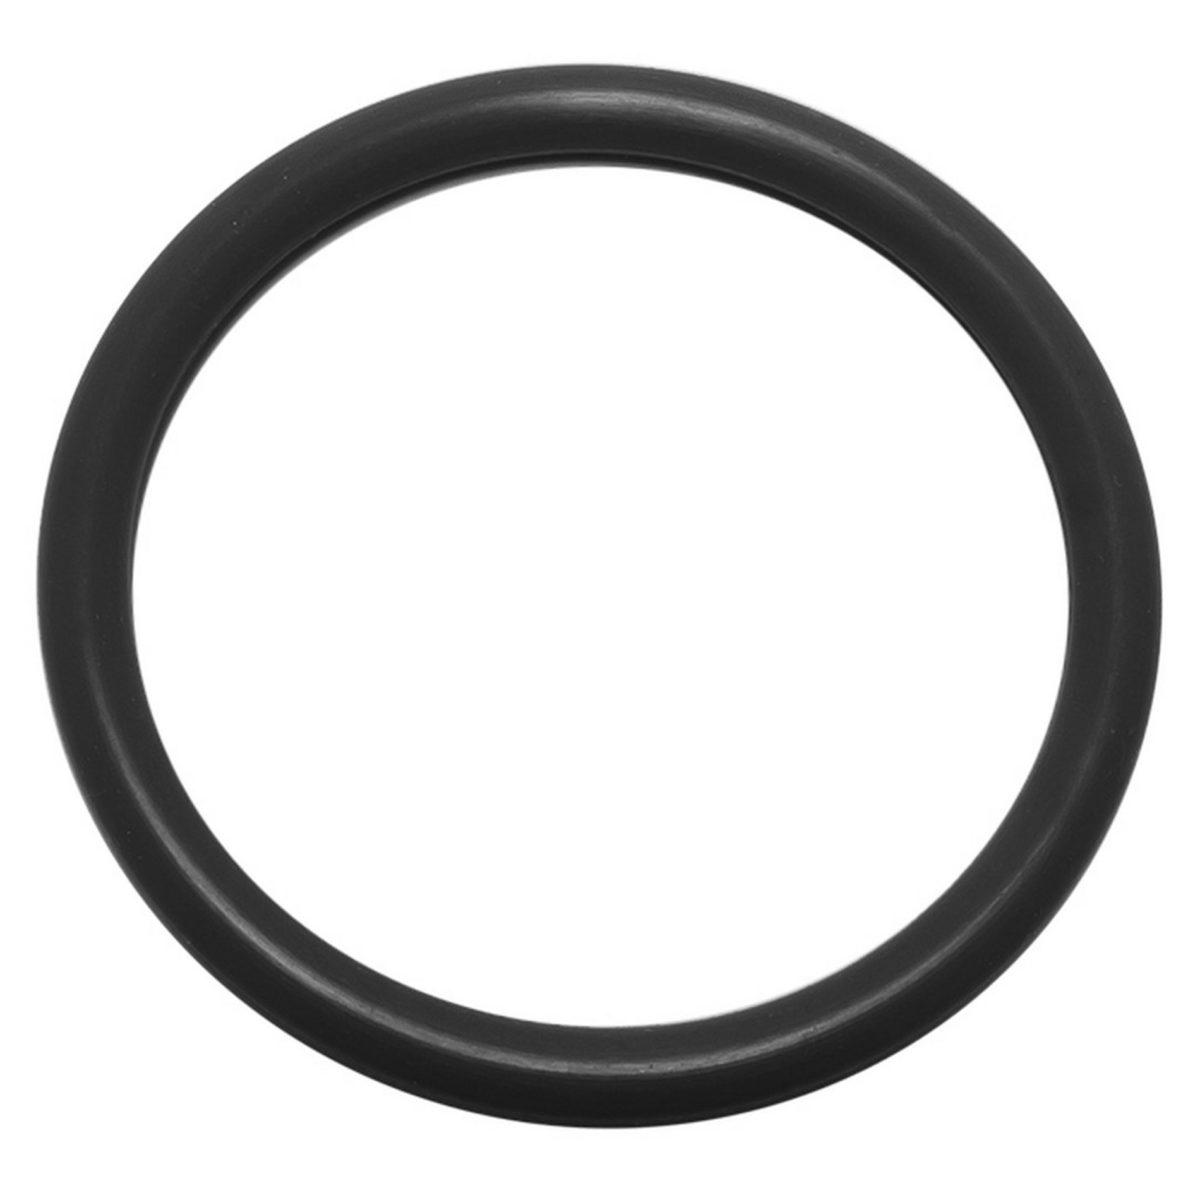 EPDM Inflator retaining ORing for harness